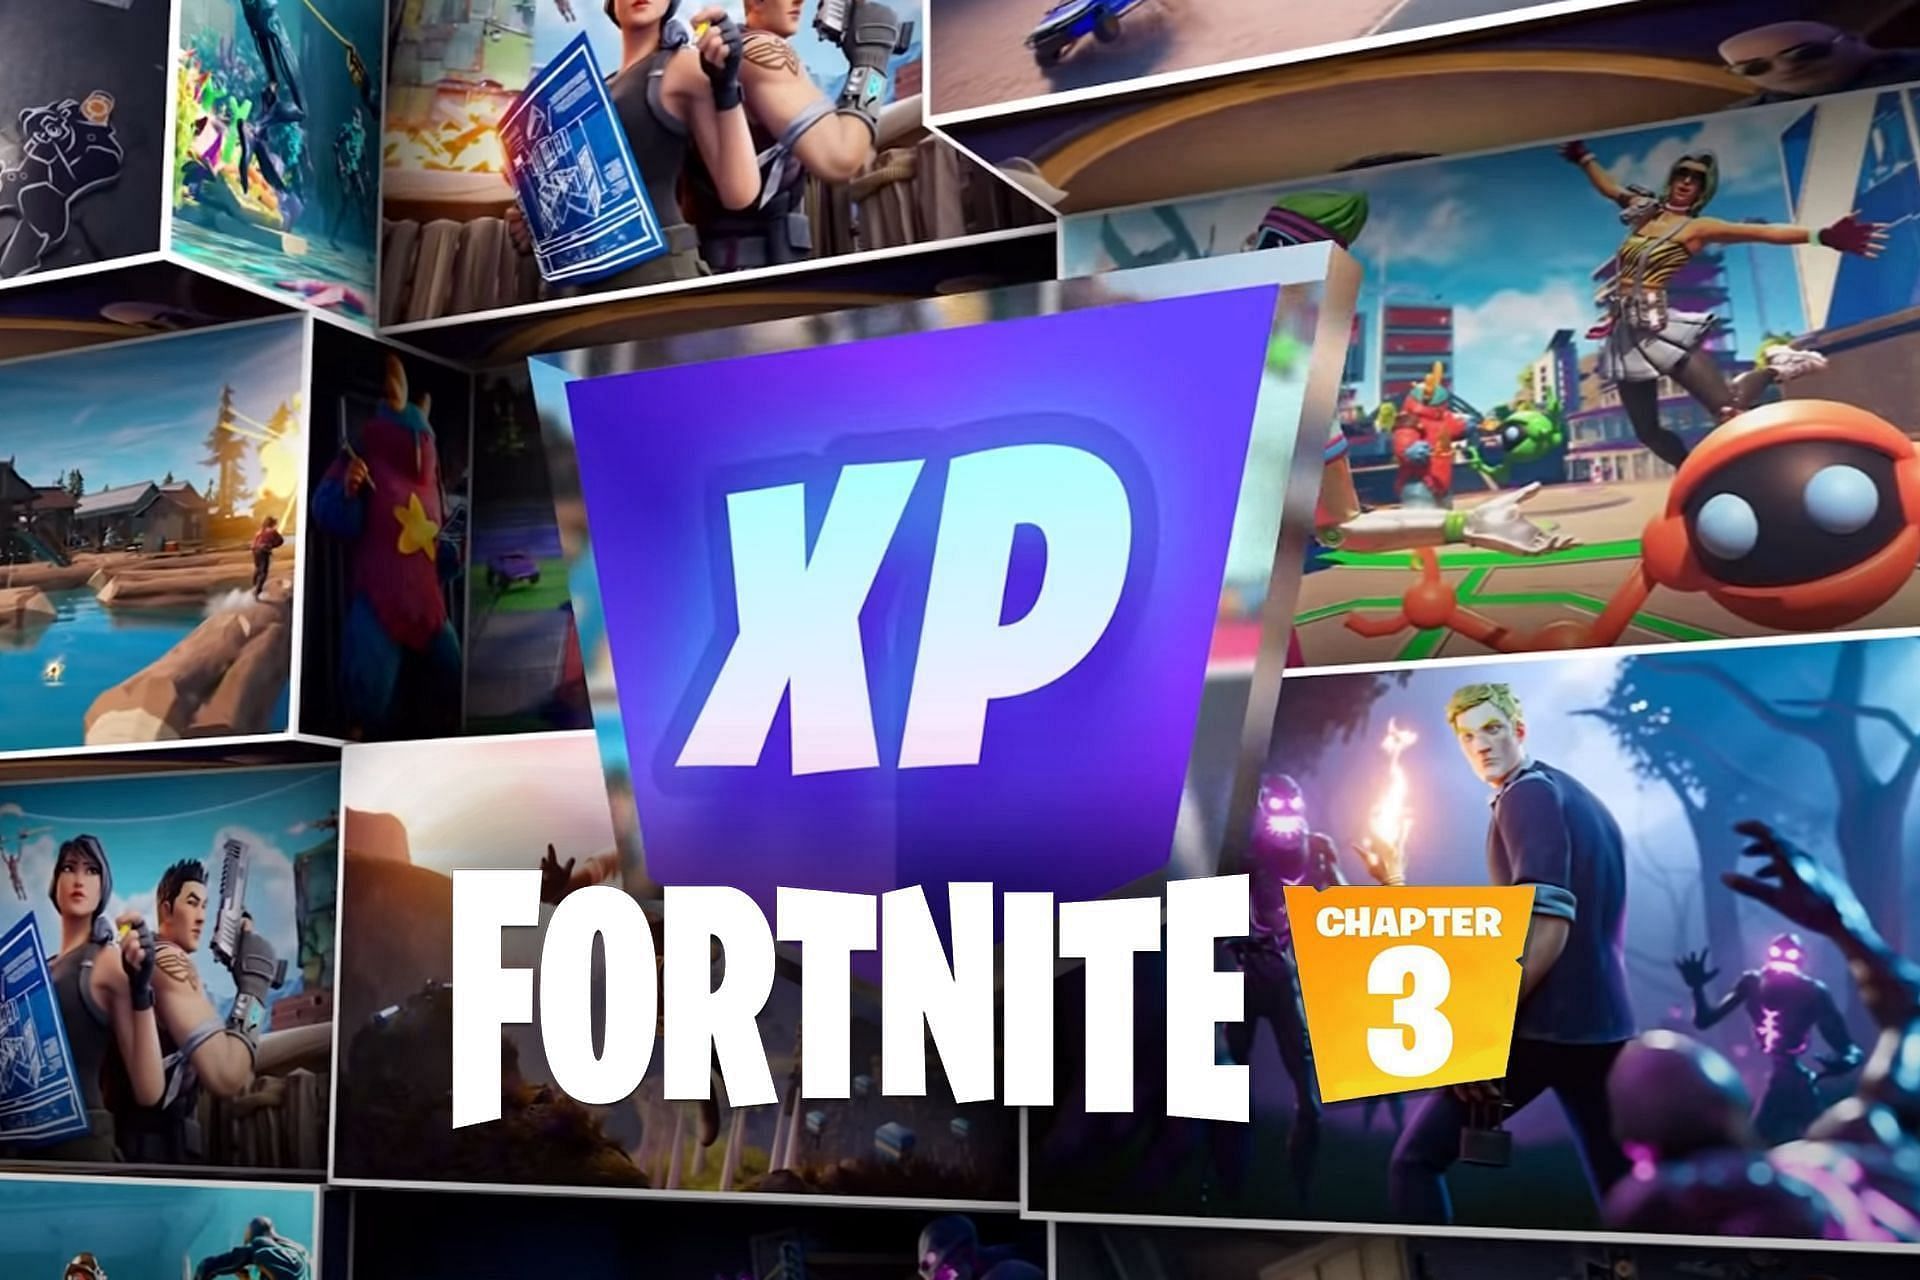 Earn XP fast in Fortnite Chapter 3 and reach level 100 quickly to unlock all the exclusive Chapter 3 Season 1 outfits, including Spider-Man (Image via Sportskeeda)